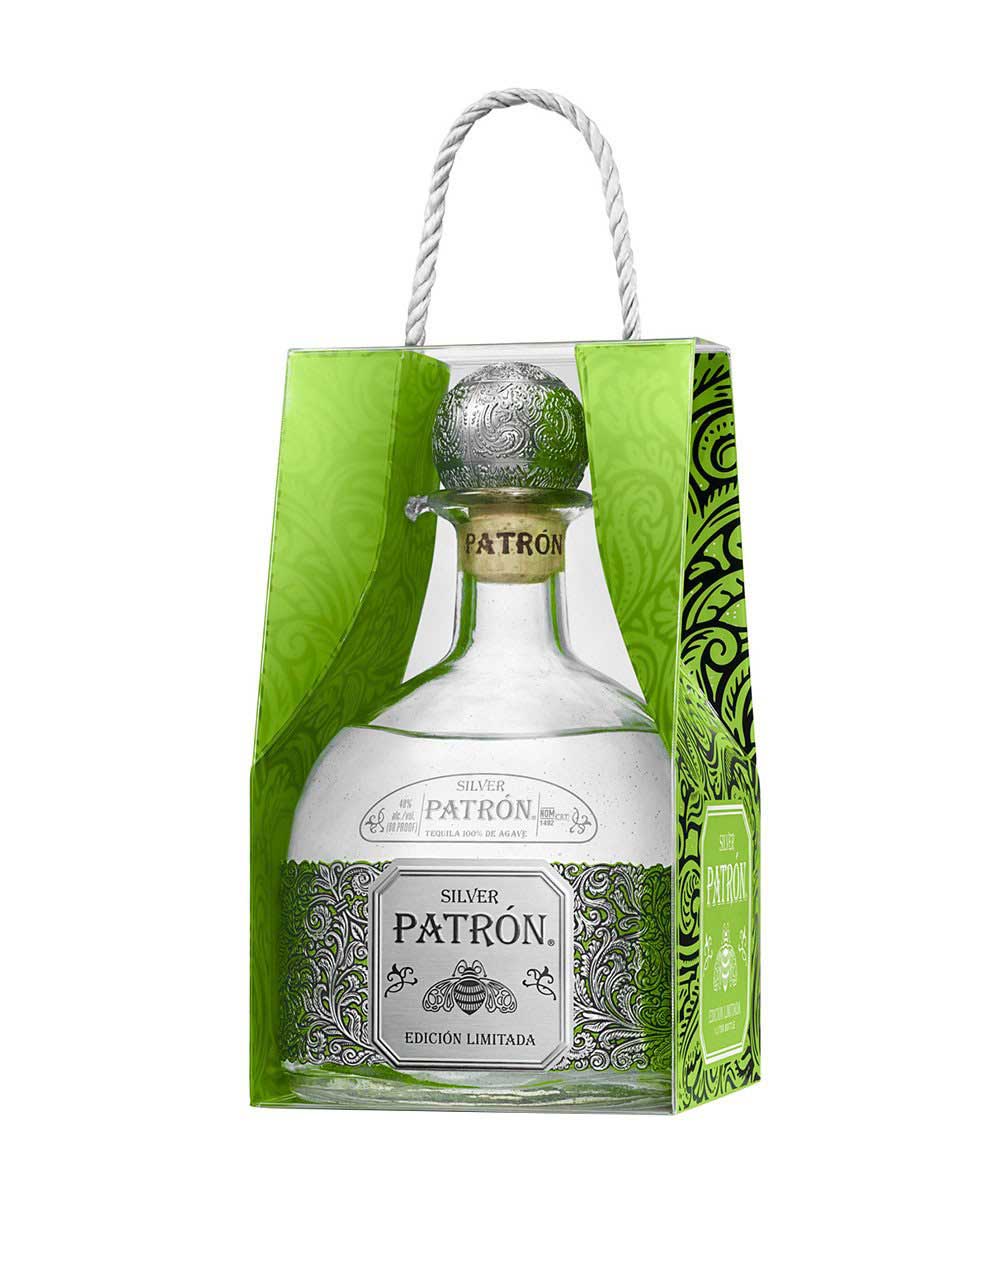 Patron Silver 2019 Limited Edition